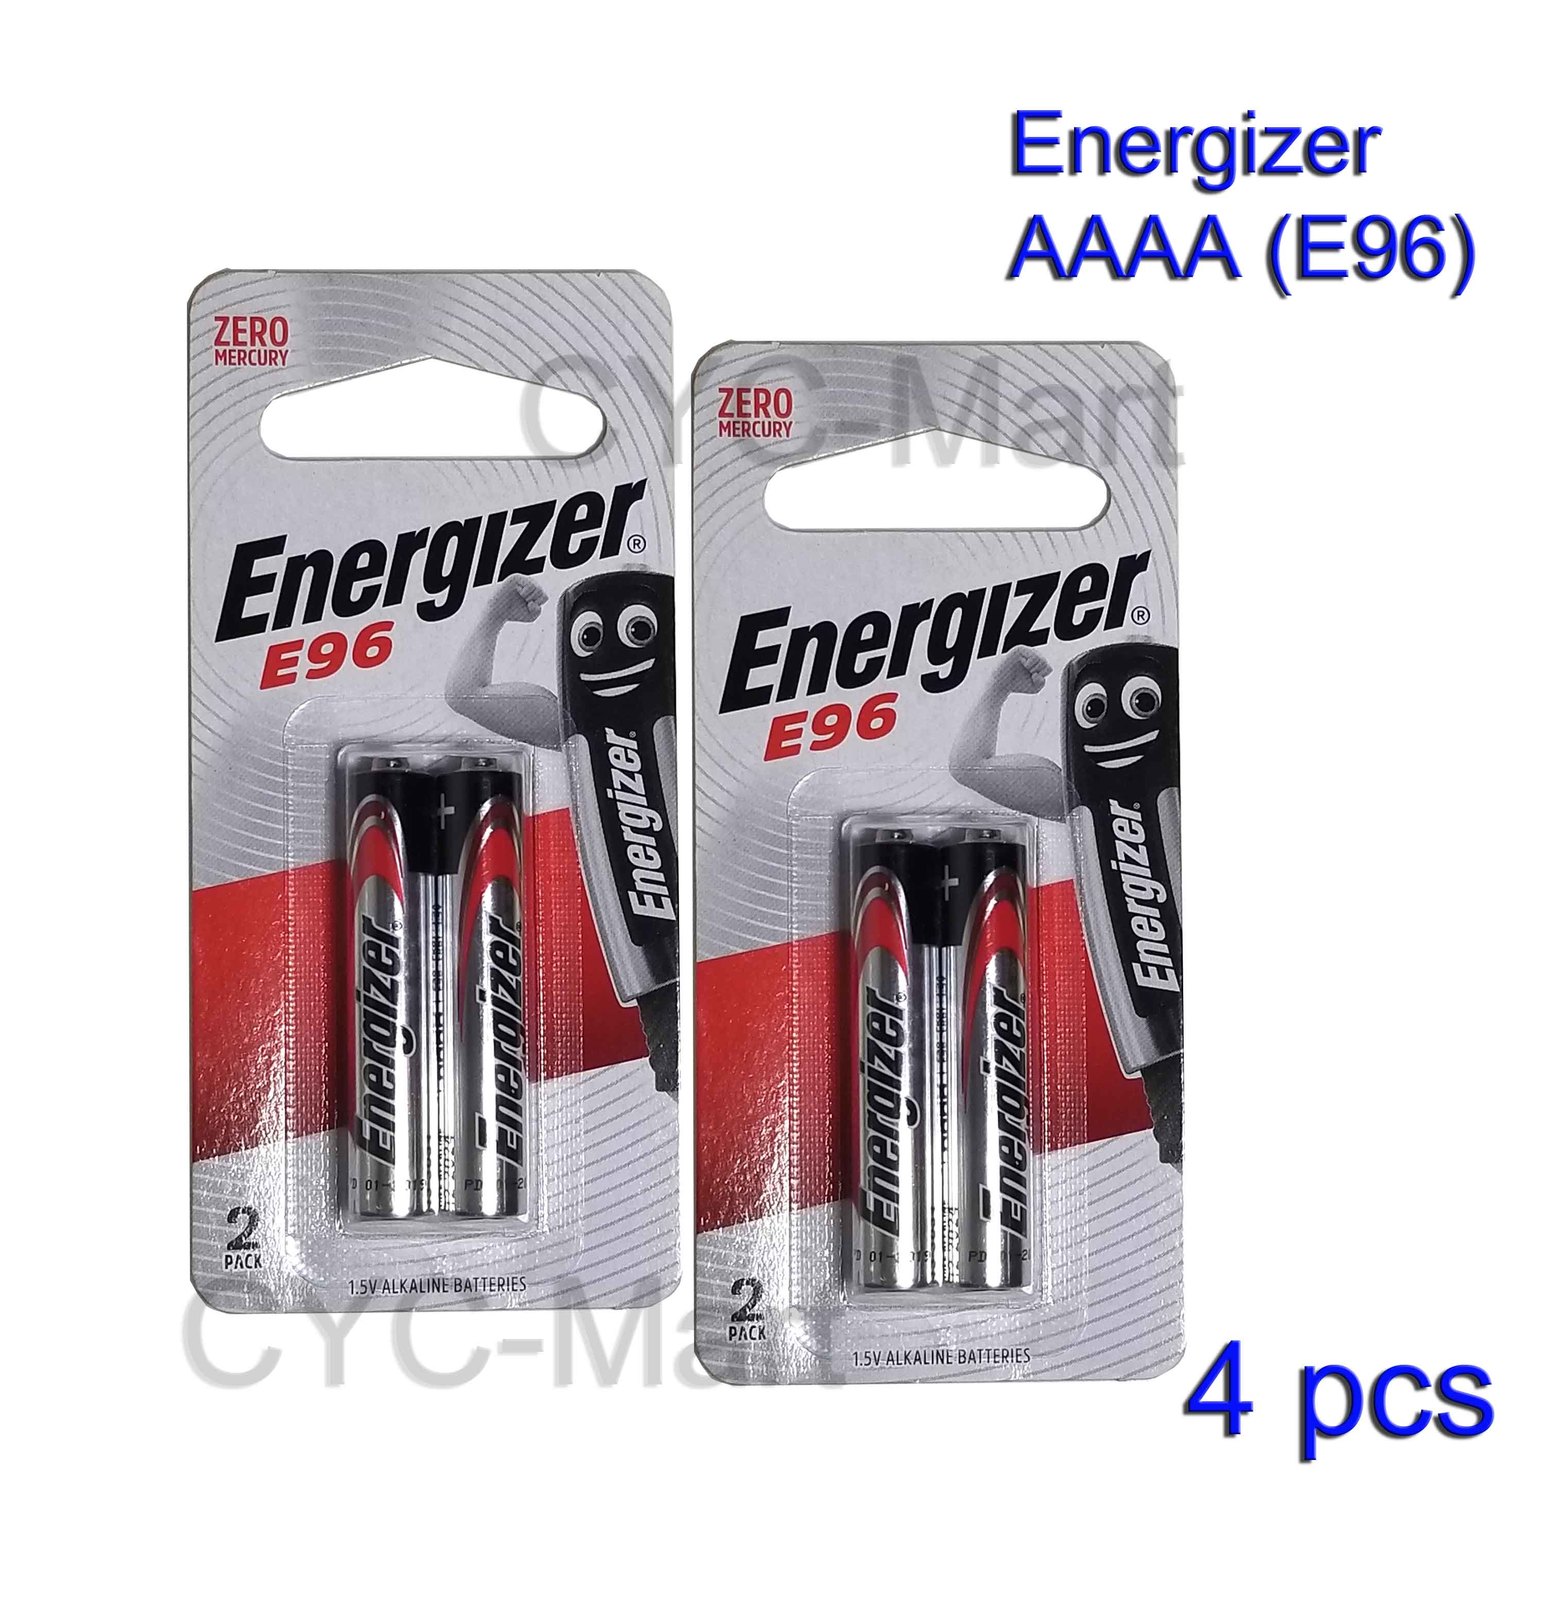 Primary image for ENergizer AAAA E96 alkaline battery 1.5 V 2 packs of 2, total 4 batteries